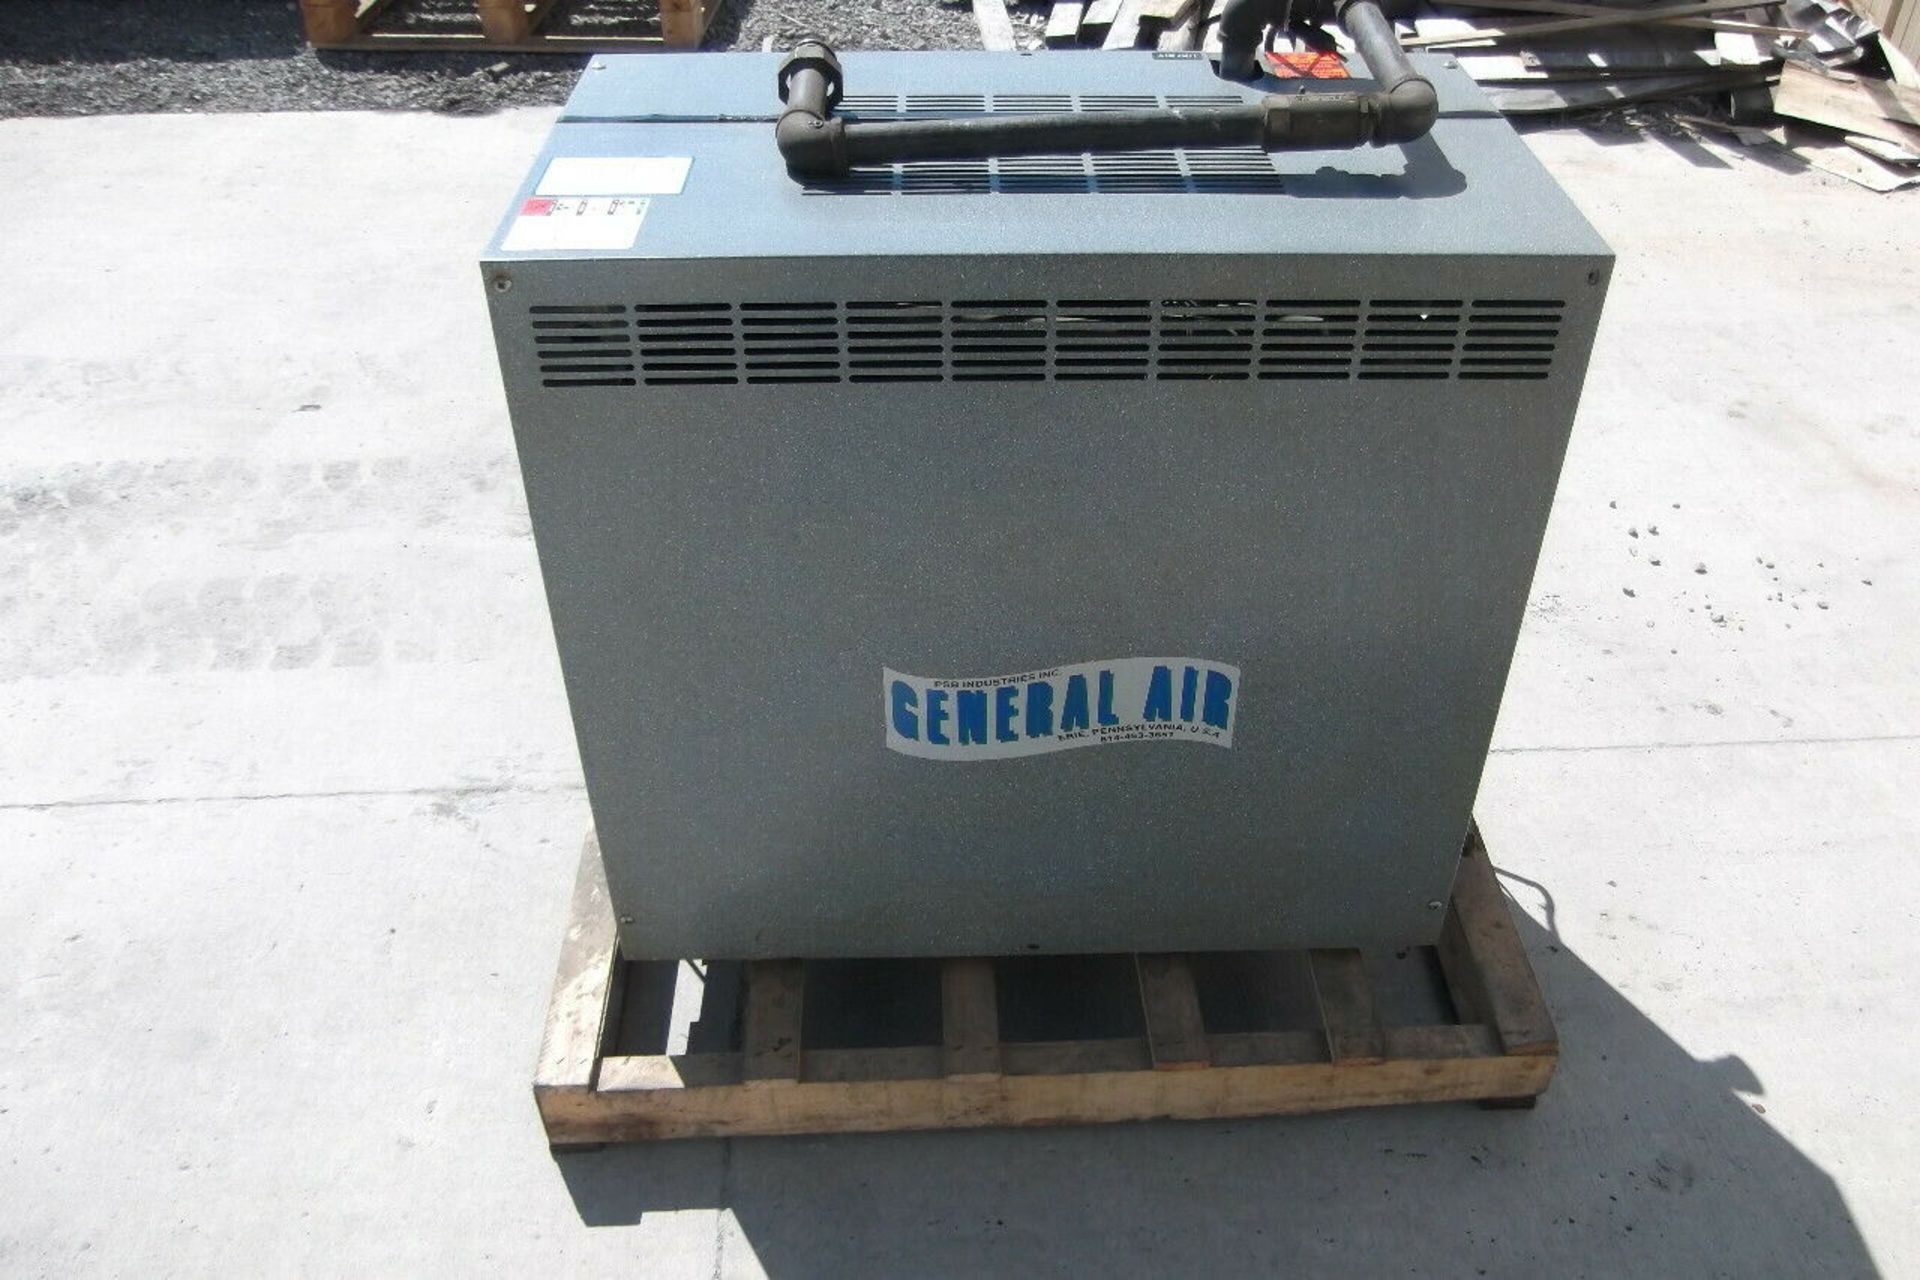 PSB Industries Four Star General Air Dryer 115V 1Phase - Image 3 of 6